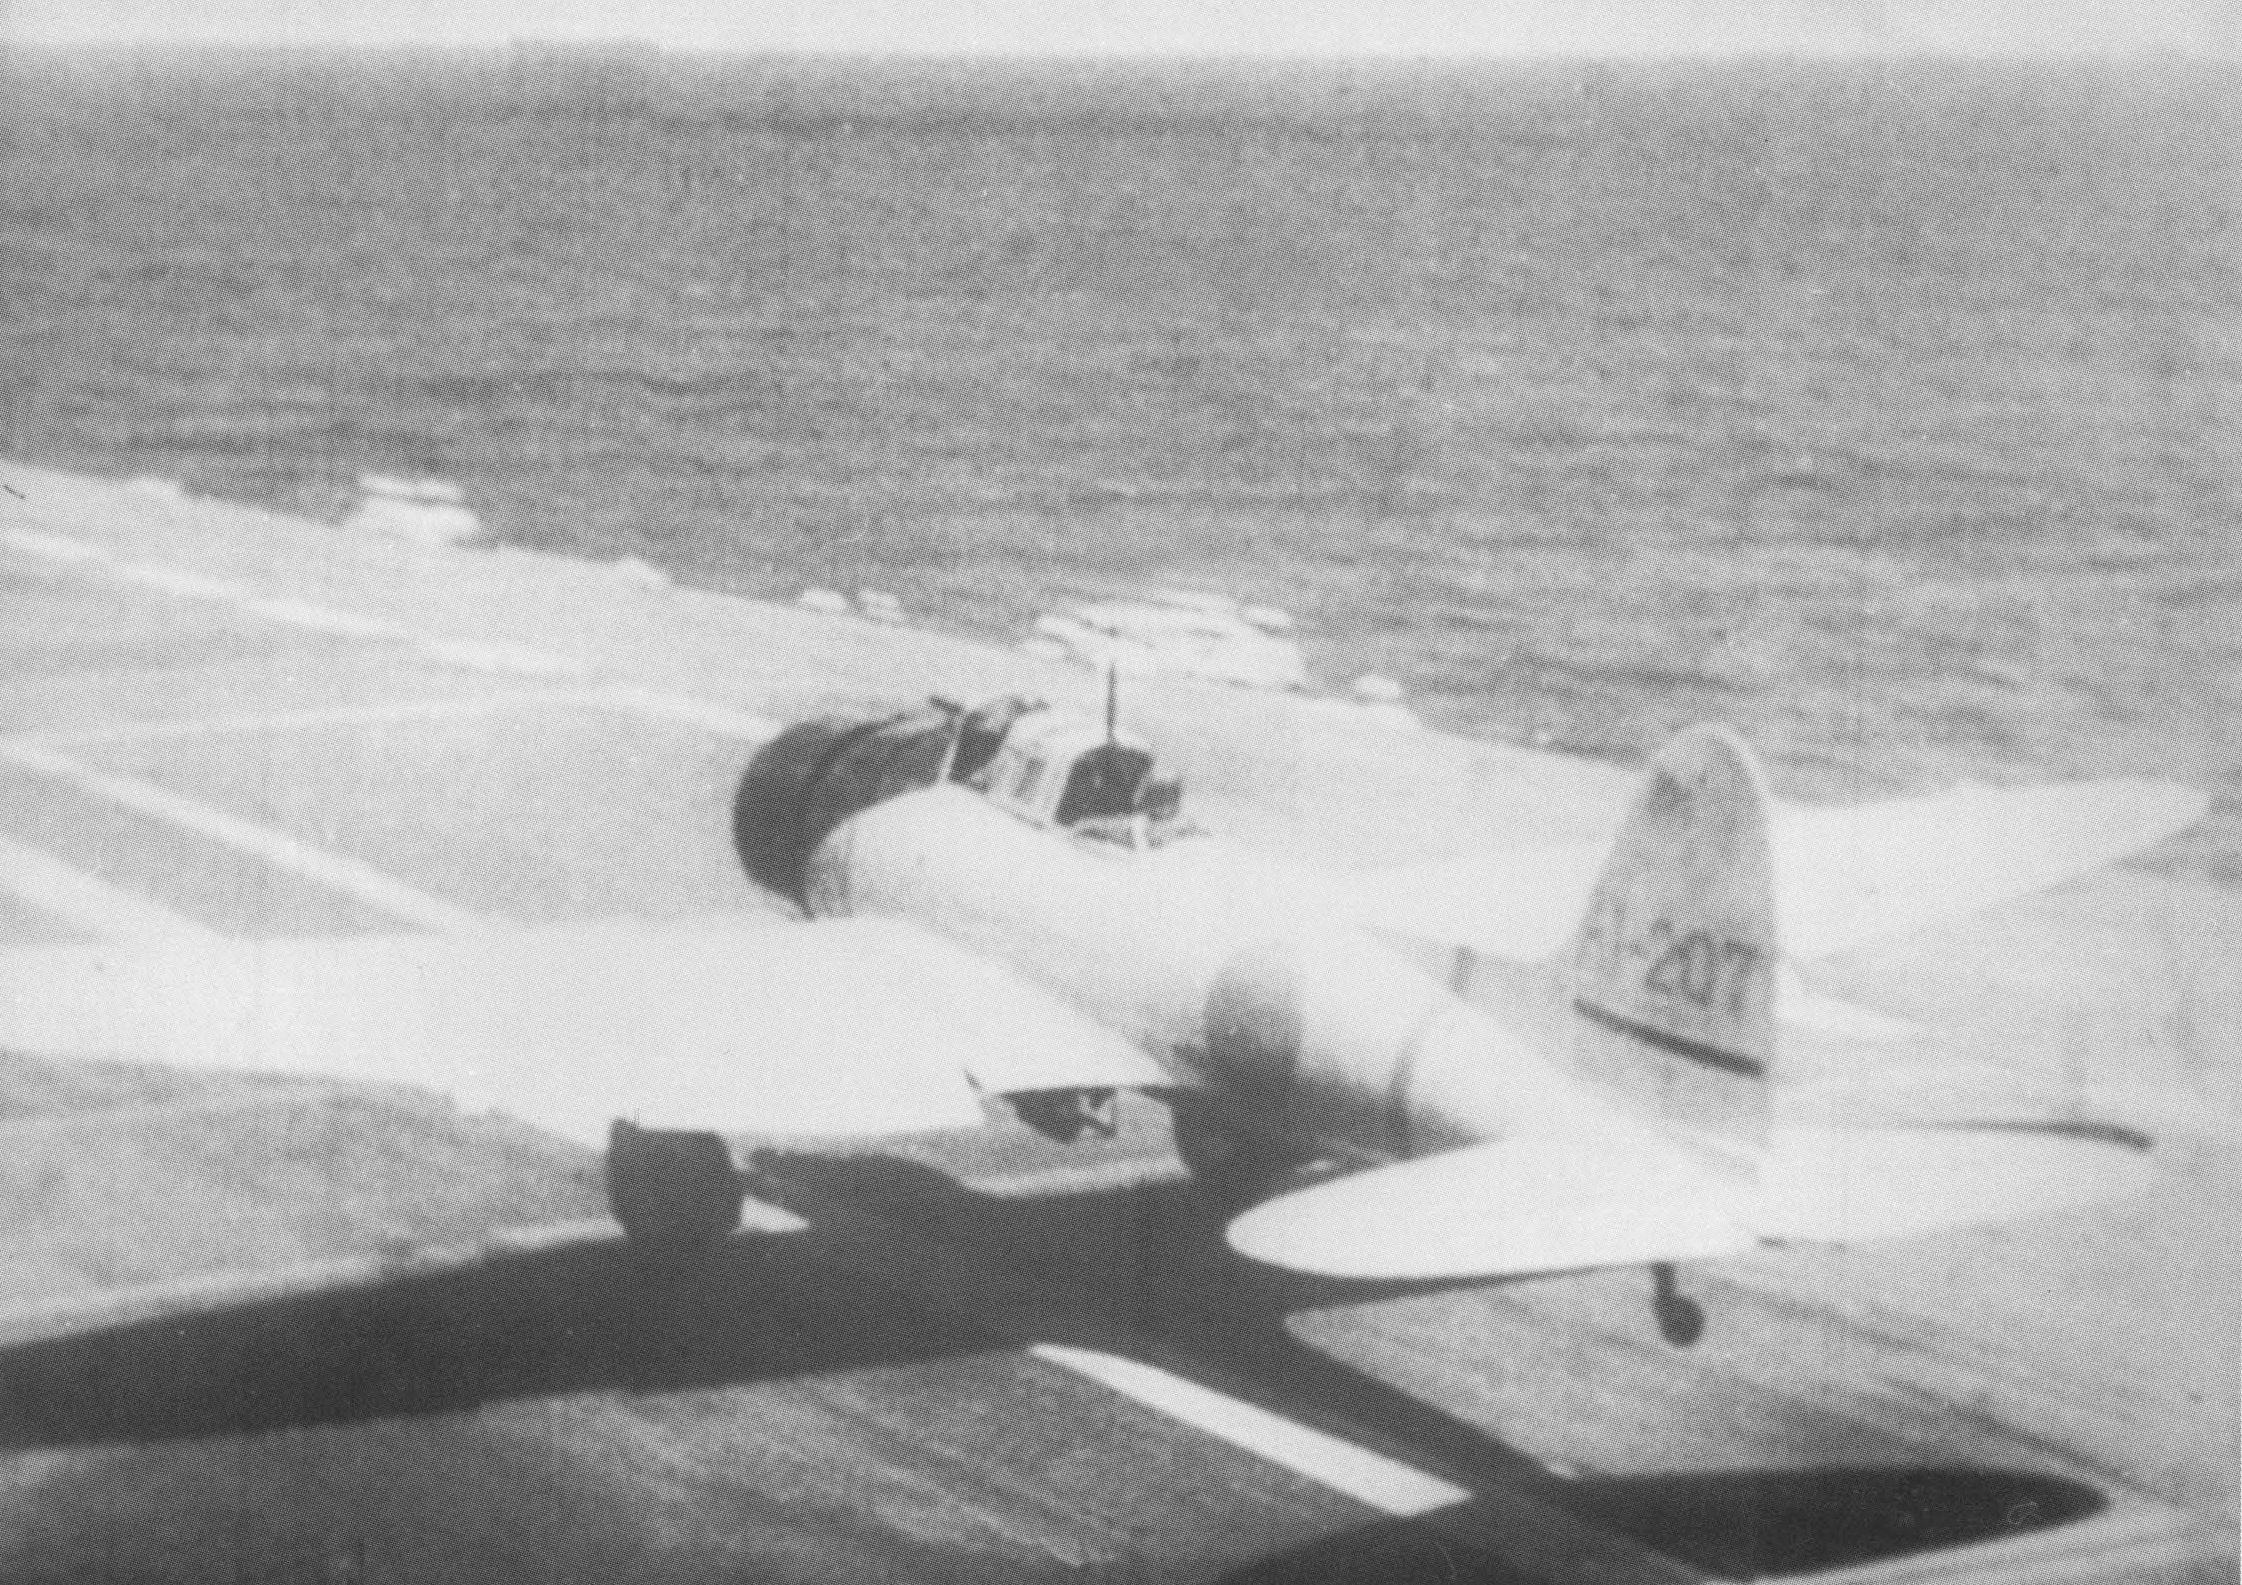 D3A dive bomber taking off from carrier Akagi, Indian Ocean, 5 Apr 1942; the single vertical red stripe toward the rear end of fuselage identified this aircraft as from Akagi